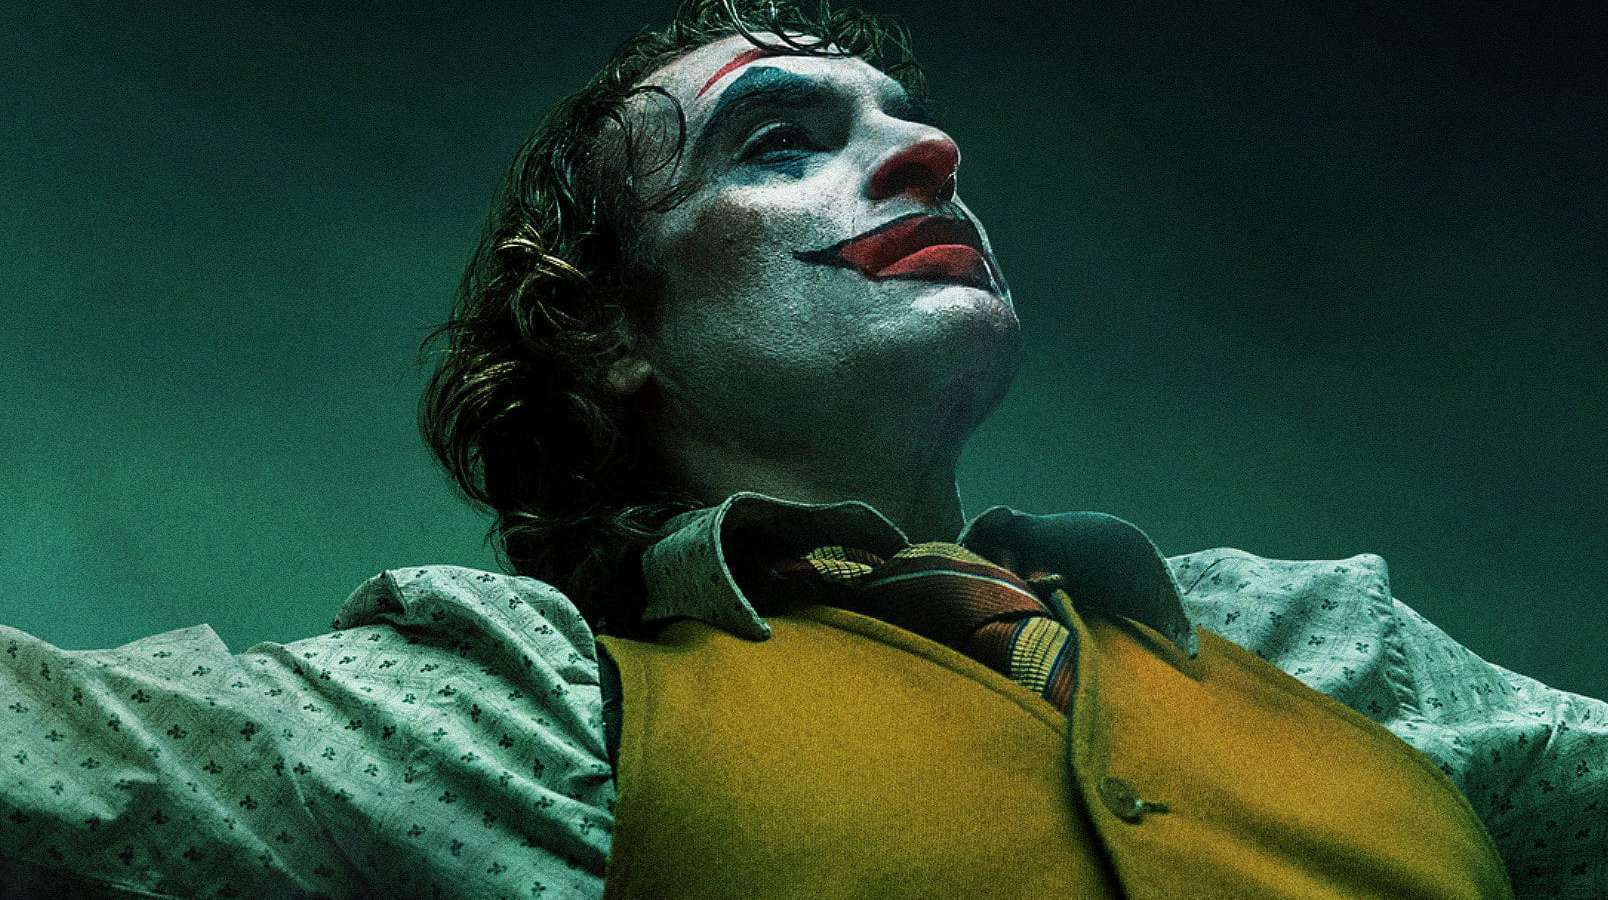 Joker' — the first $1 billion R-rated movie — leads the Oscar